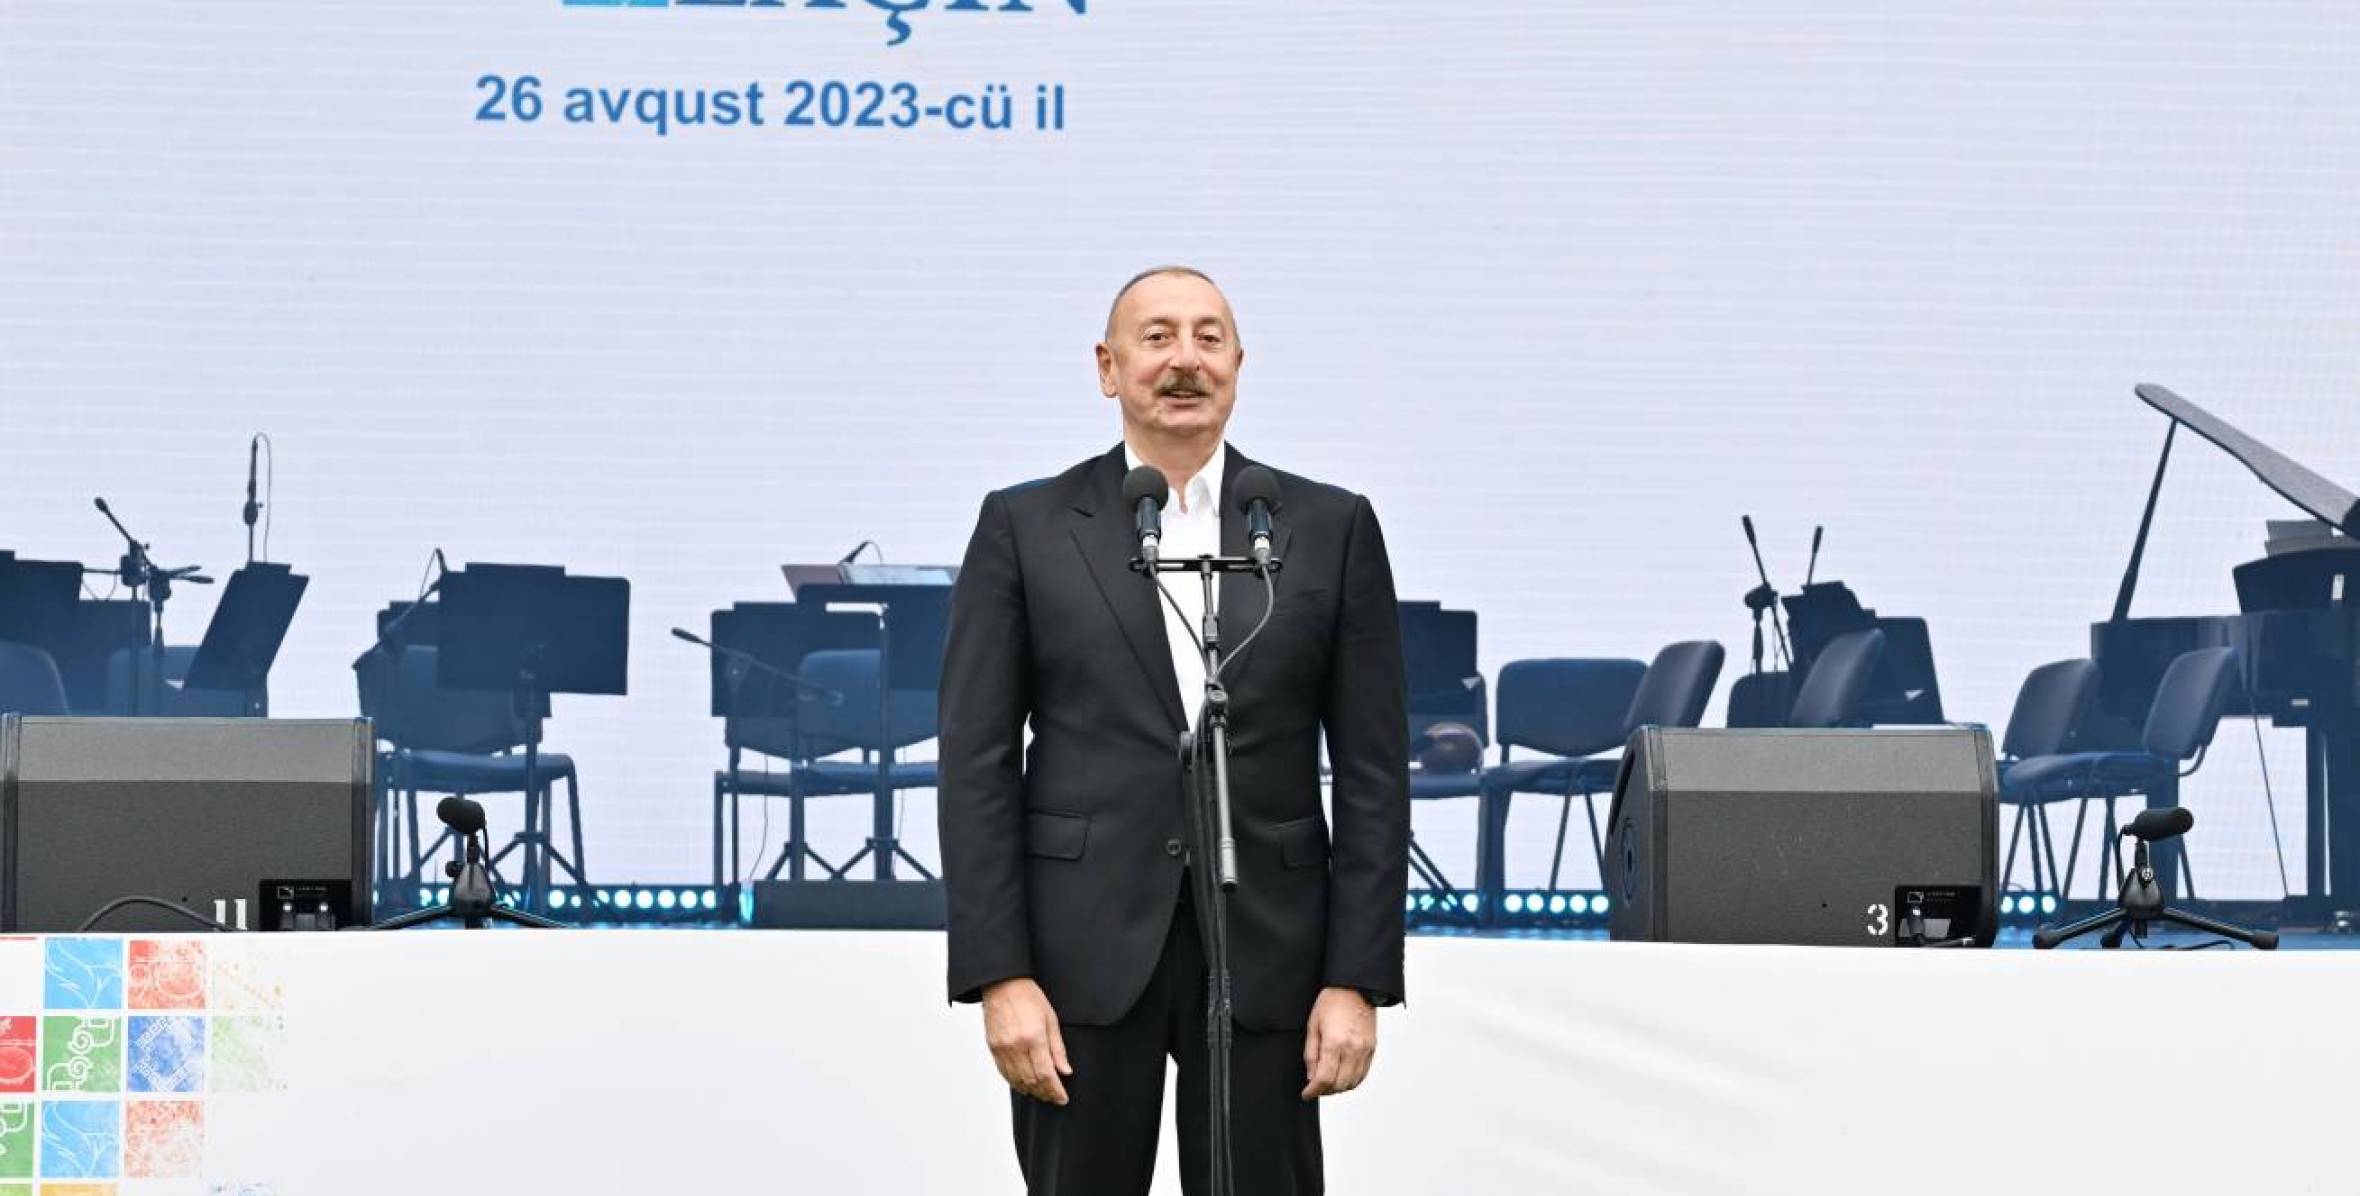 Speech by Ilham Aliyev at the “Lachin City Day” festivities held on the bank of the Hakari River